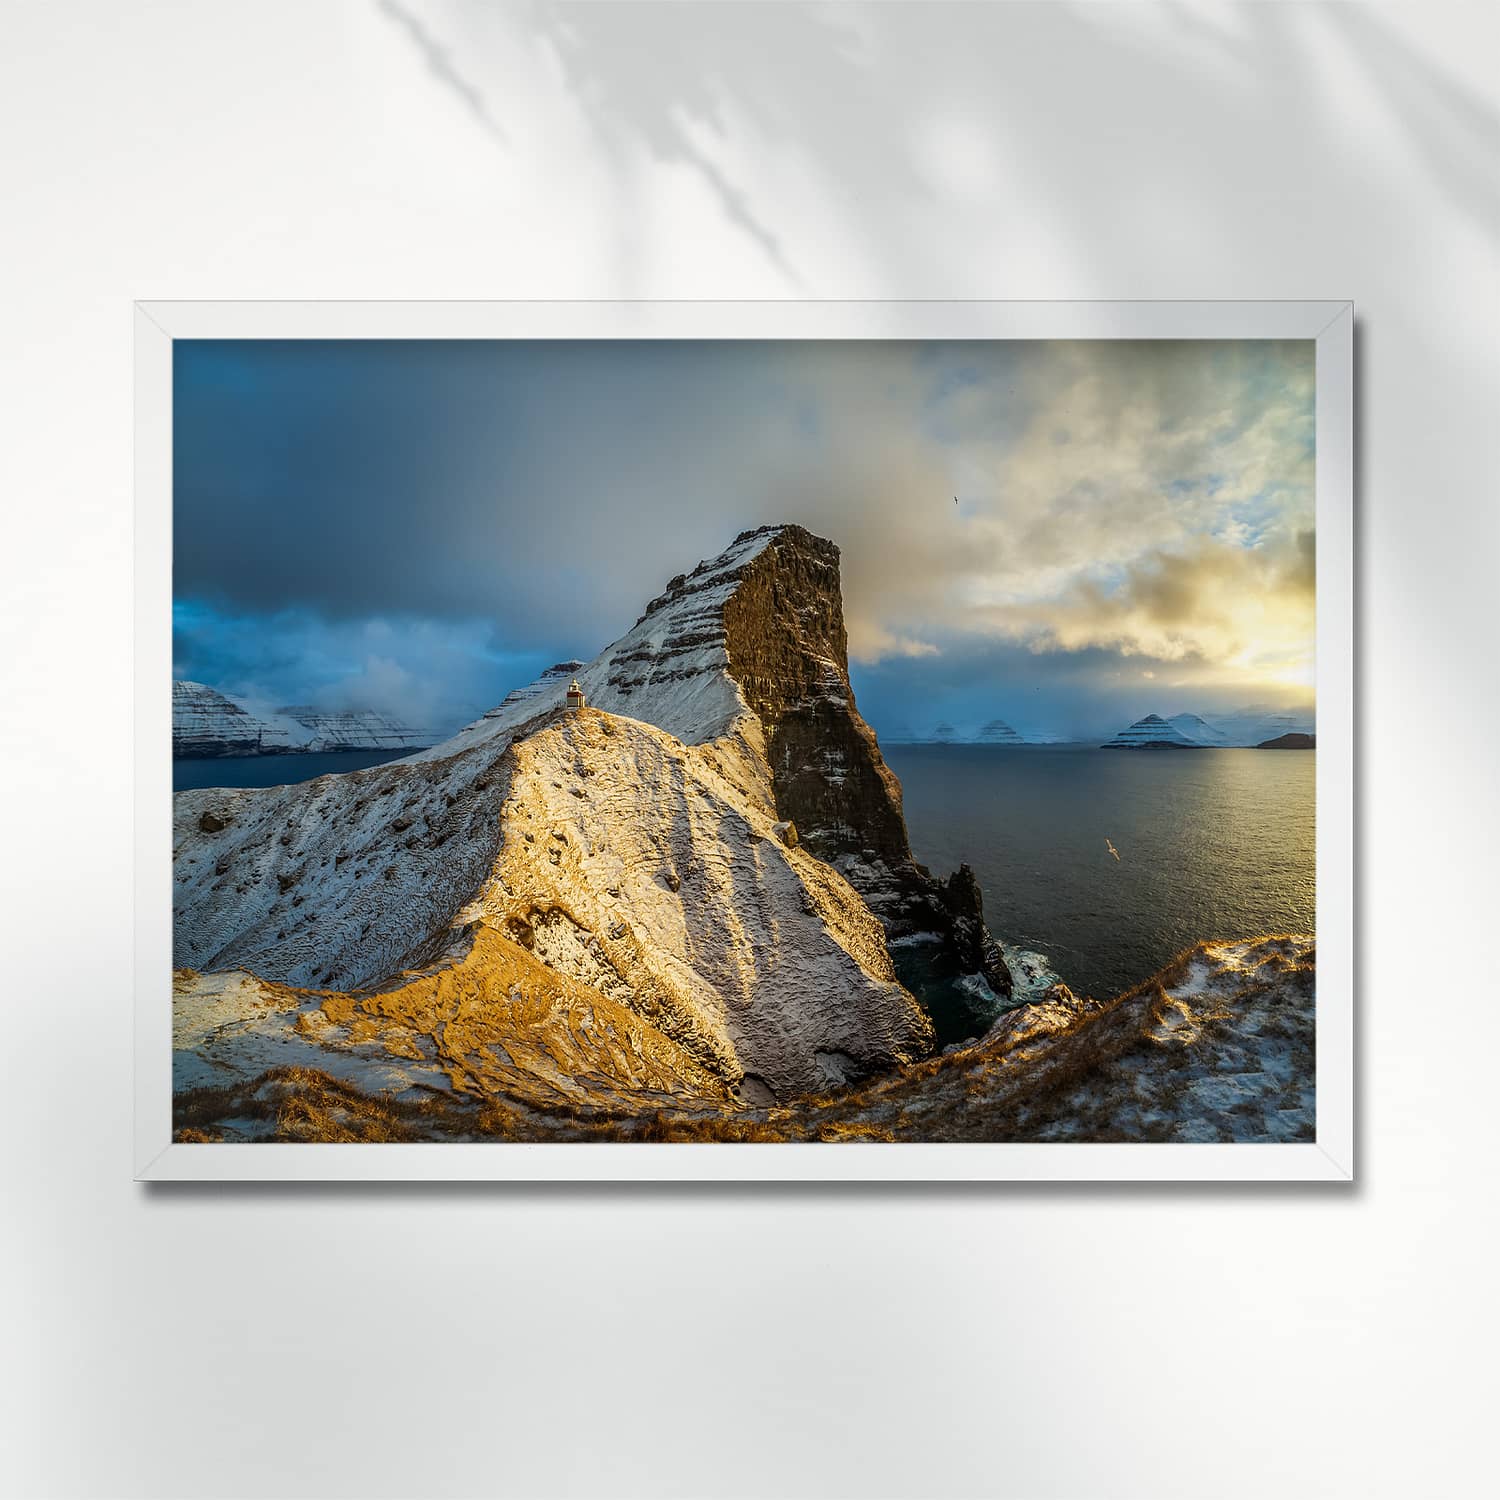 LIGHTHOUSE IN KALSOY AT SUNSET, FAROE ISLANDS - POSTER kallurin kalsoy lighthouse winter poster frame 7041